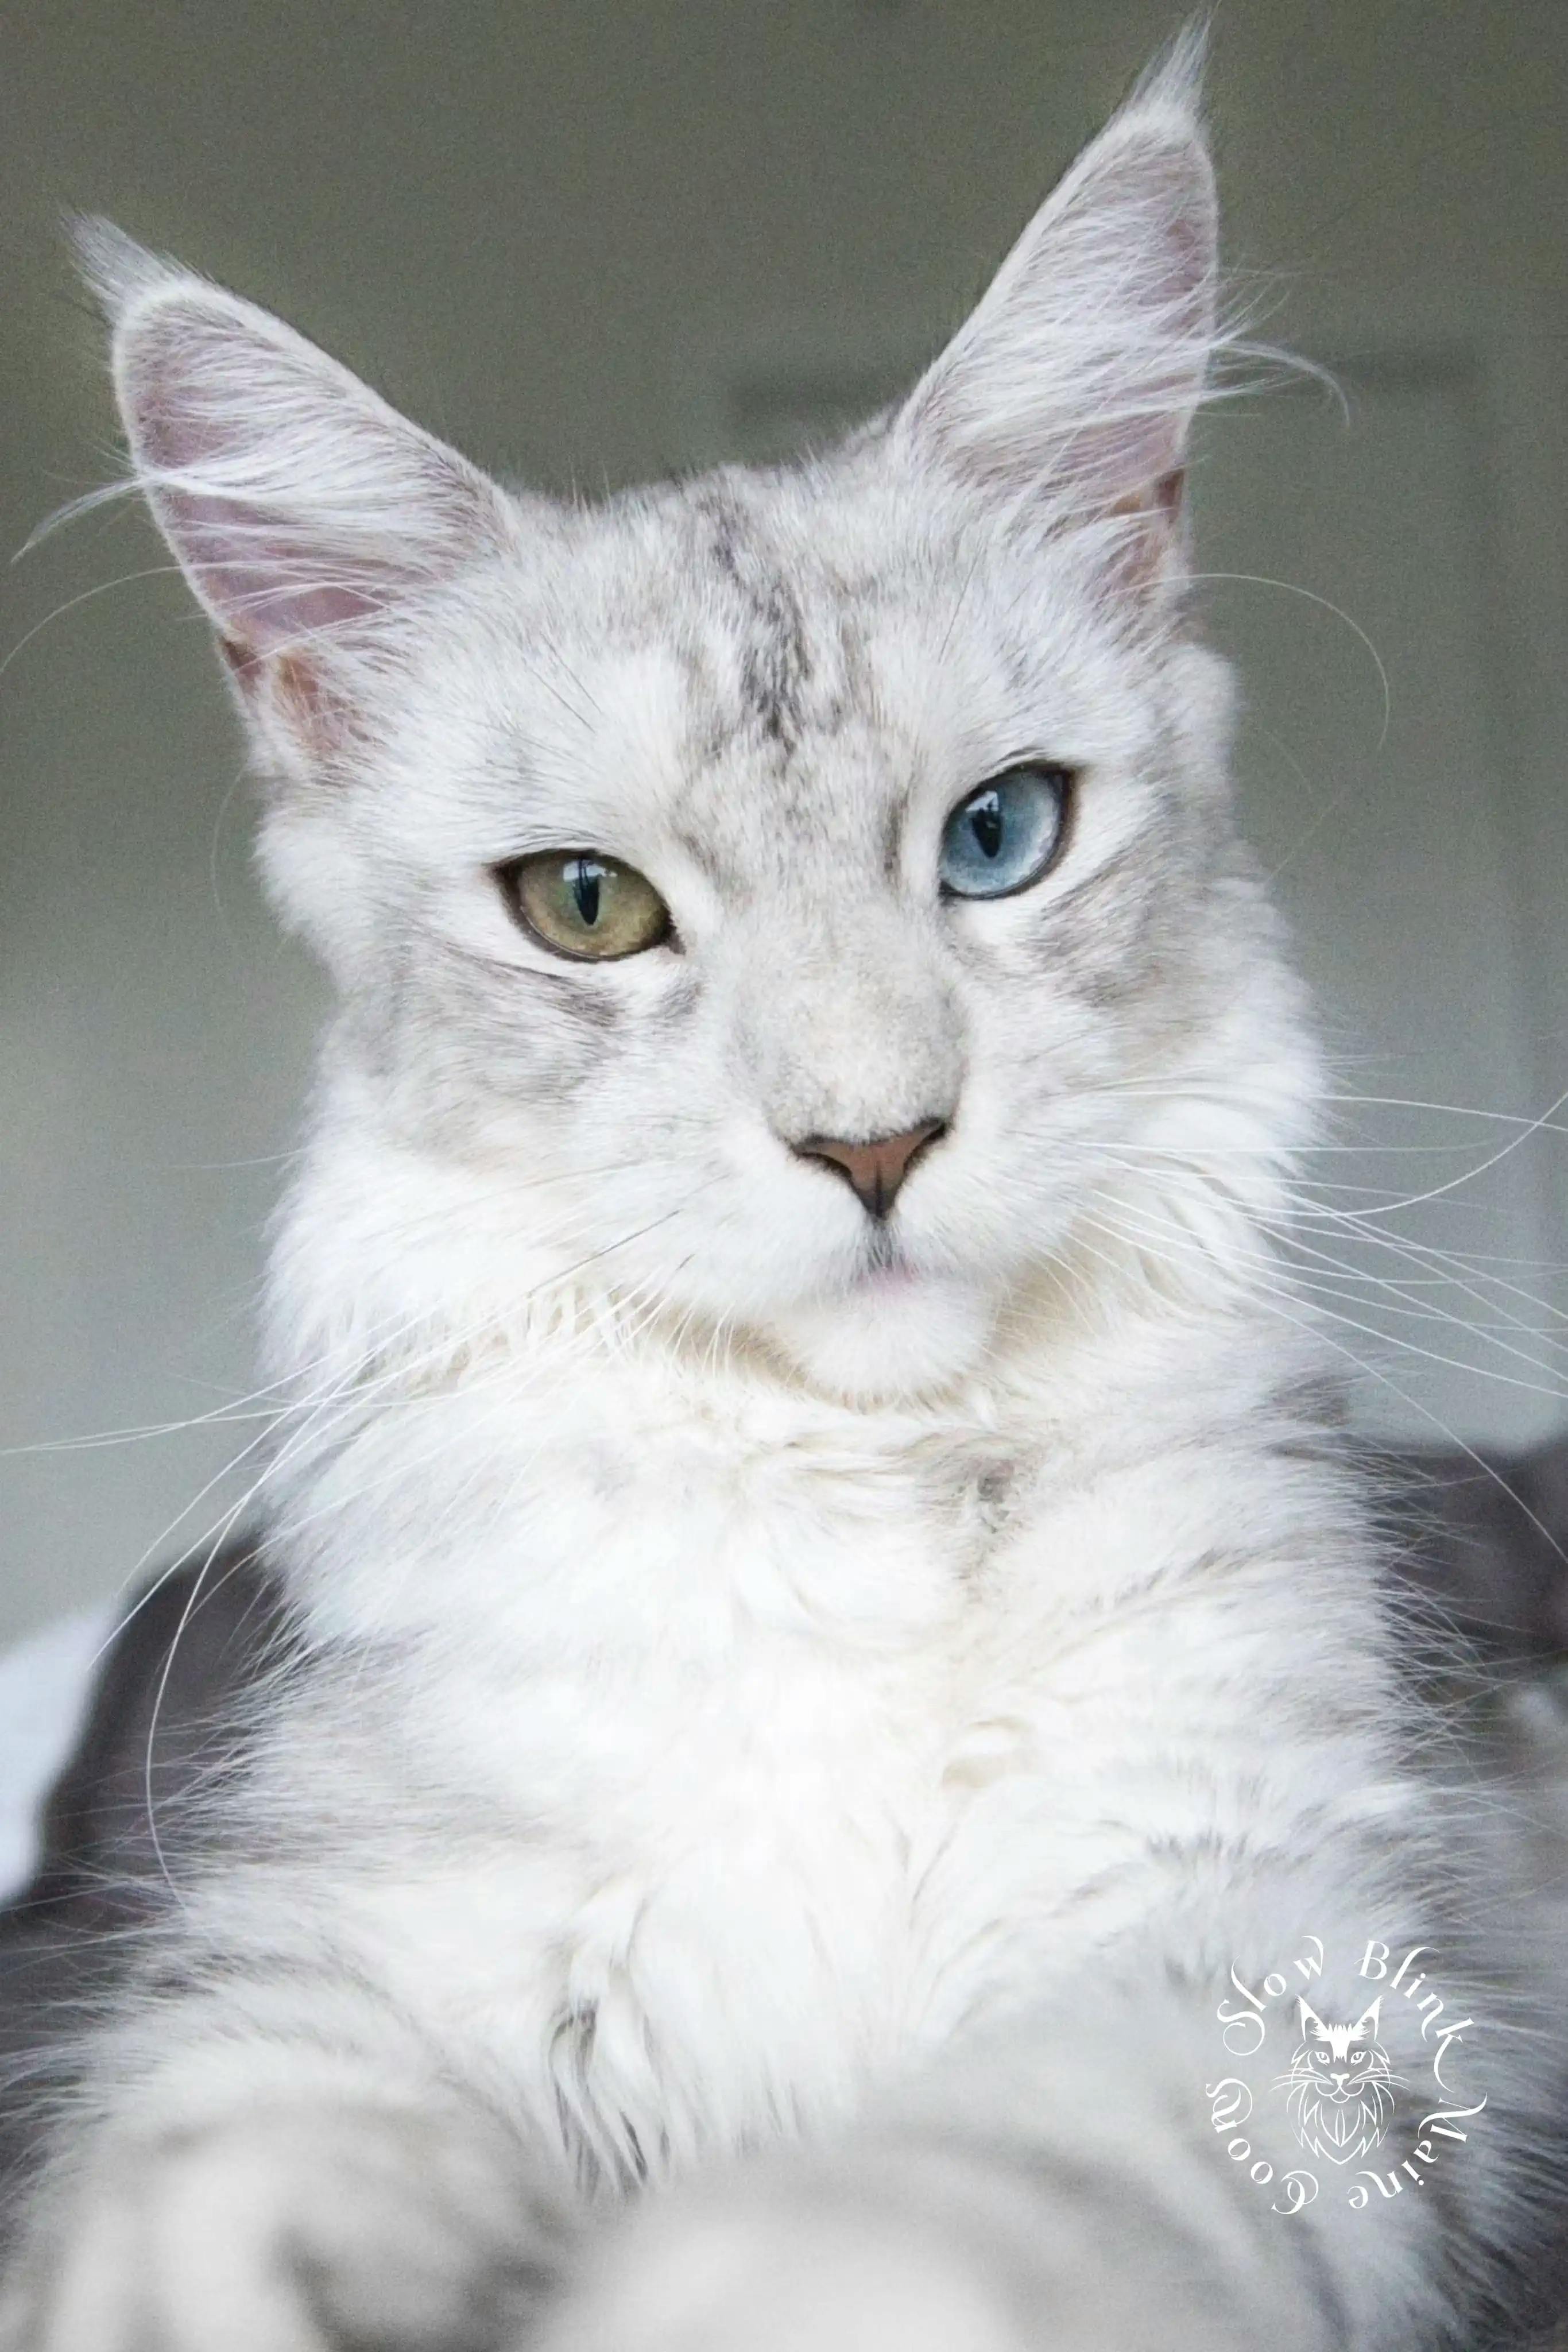 Adult Maine Coon Cat from SlowBlinkMaineCoons > ems code ns 25 63 | female | silver shaded | odd eyed | maine coon cat | catarina | maine coon queen at slowblink maine coons | 8 months old | 1